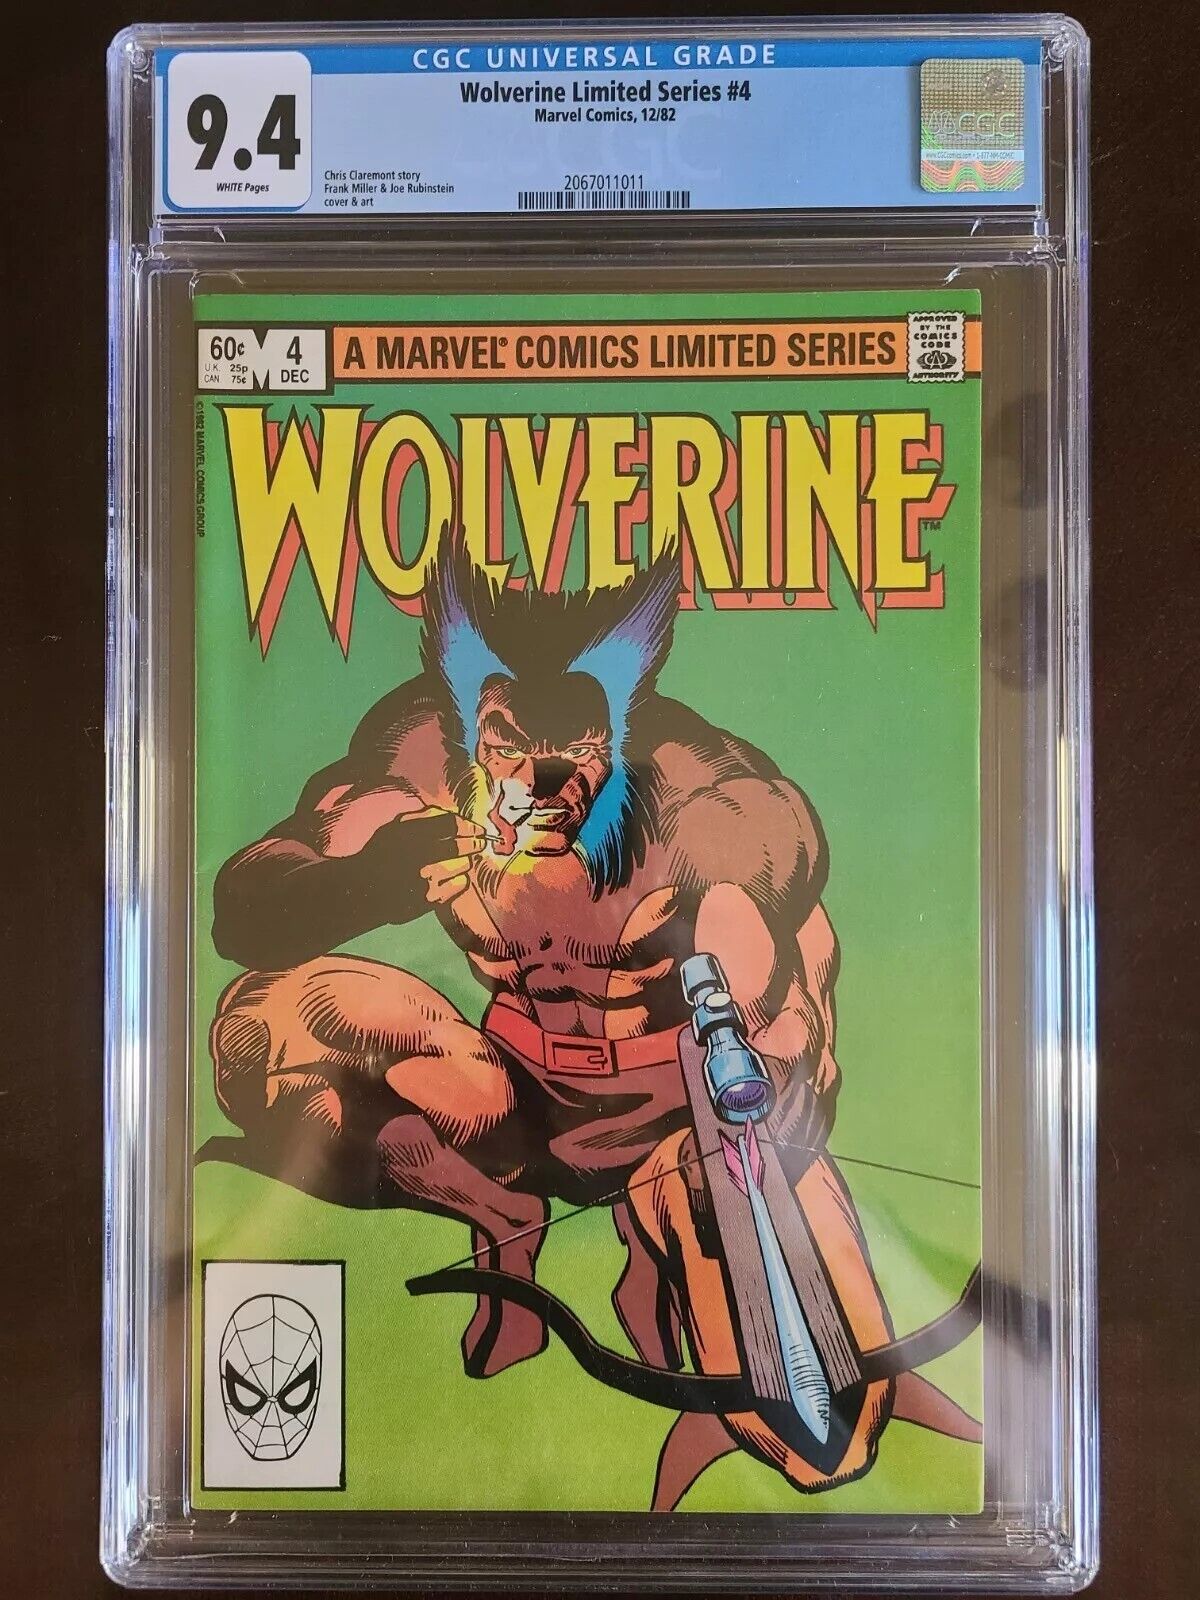 Wolverine Limited Series #4 CGC 9.4 WITH WHITE PAGES FRANK MILLER ART 1982